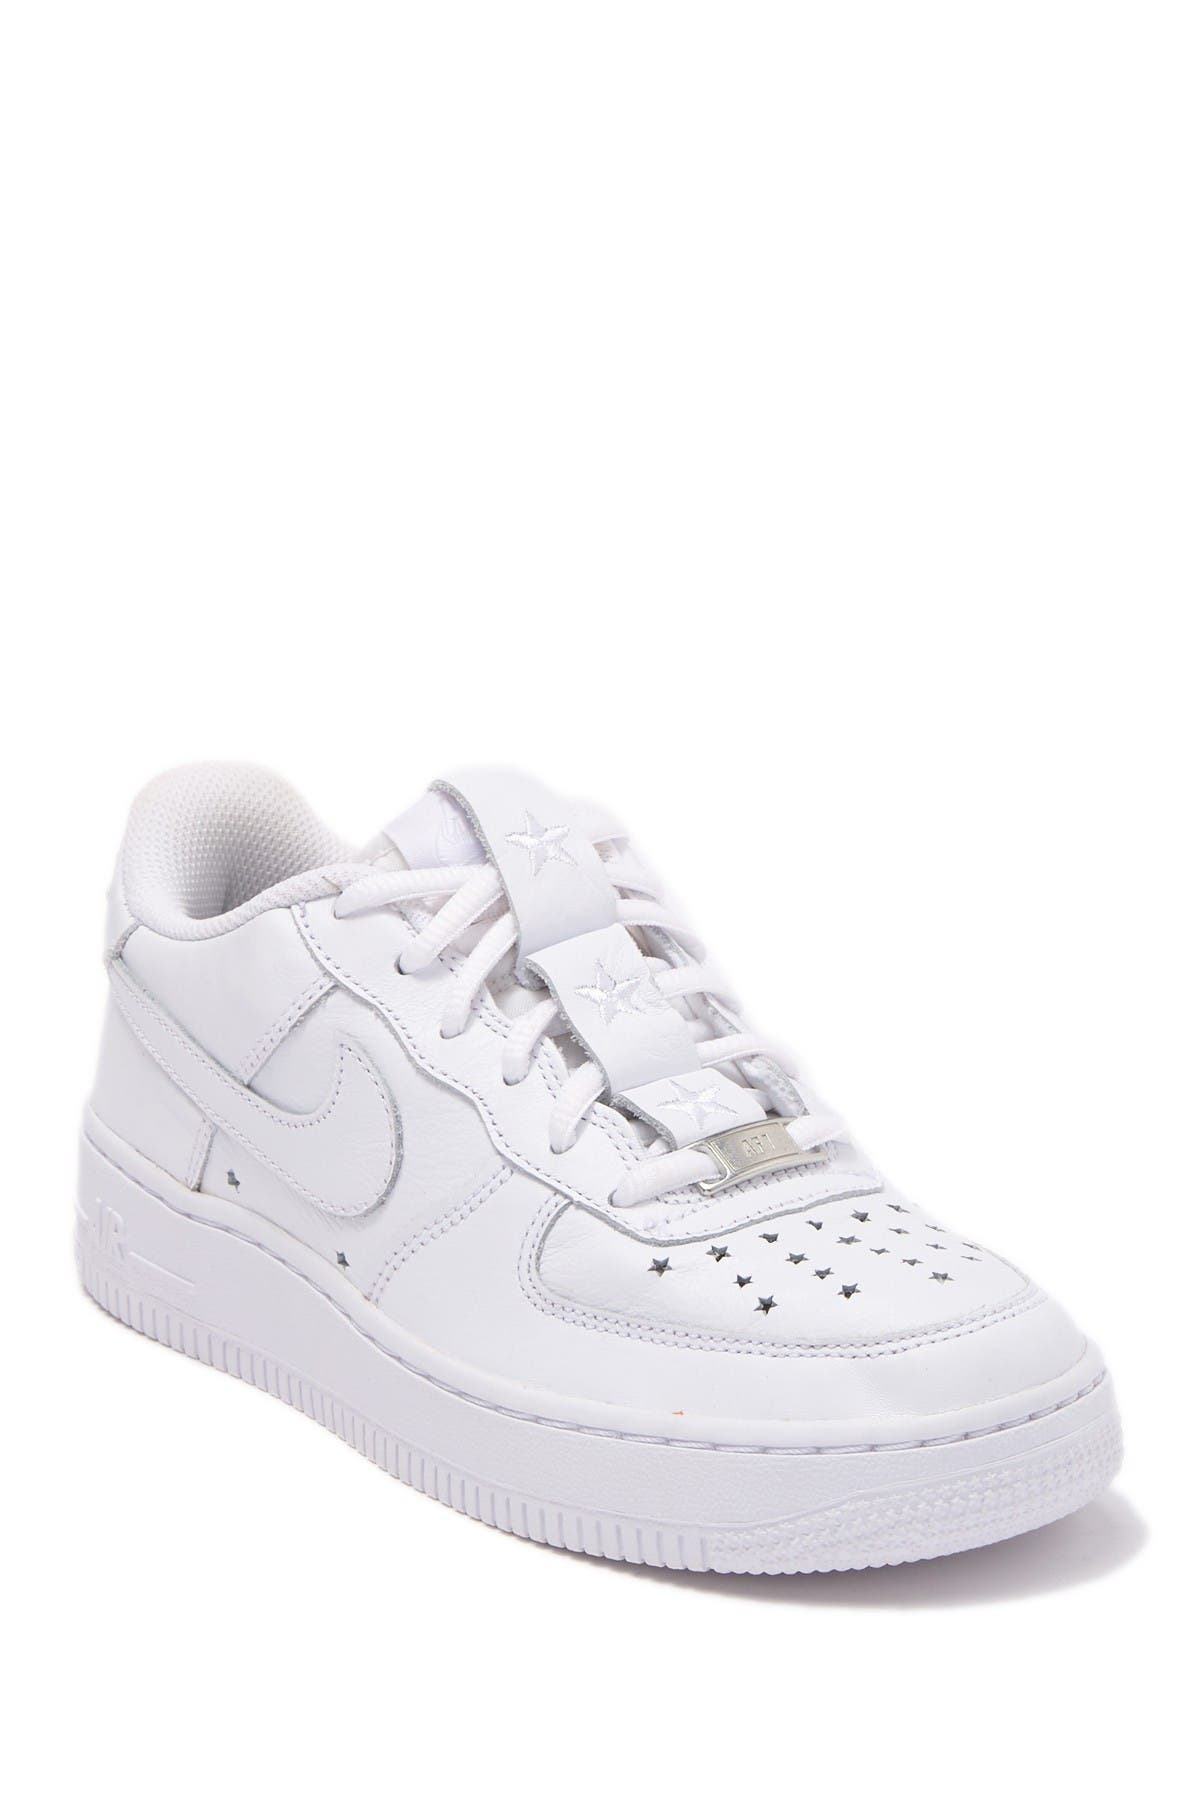 nordstrom nike air force one